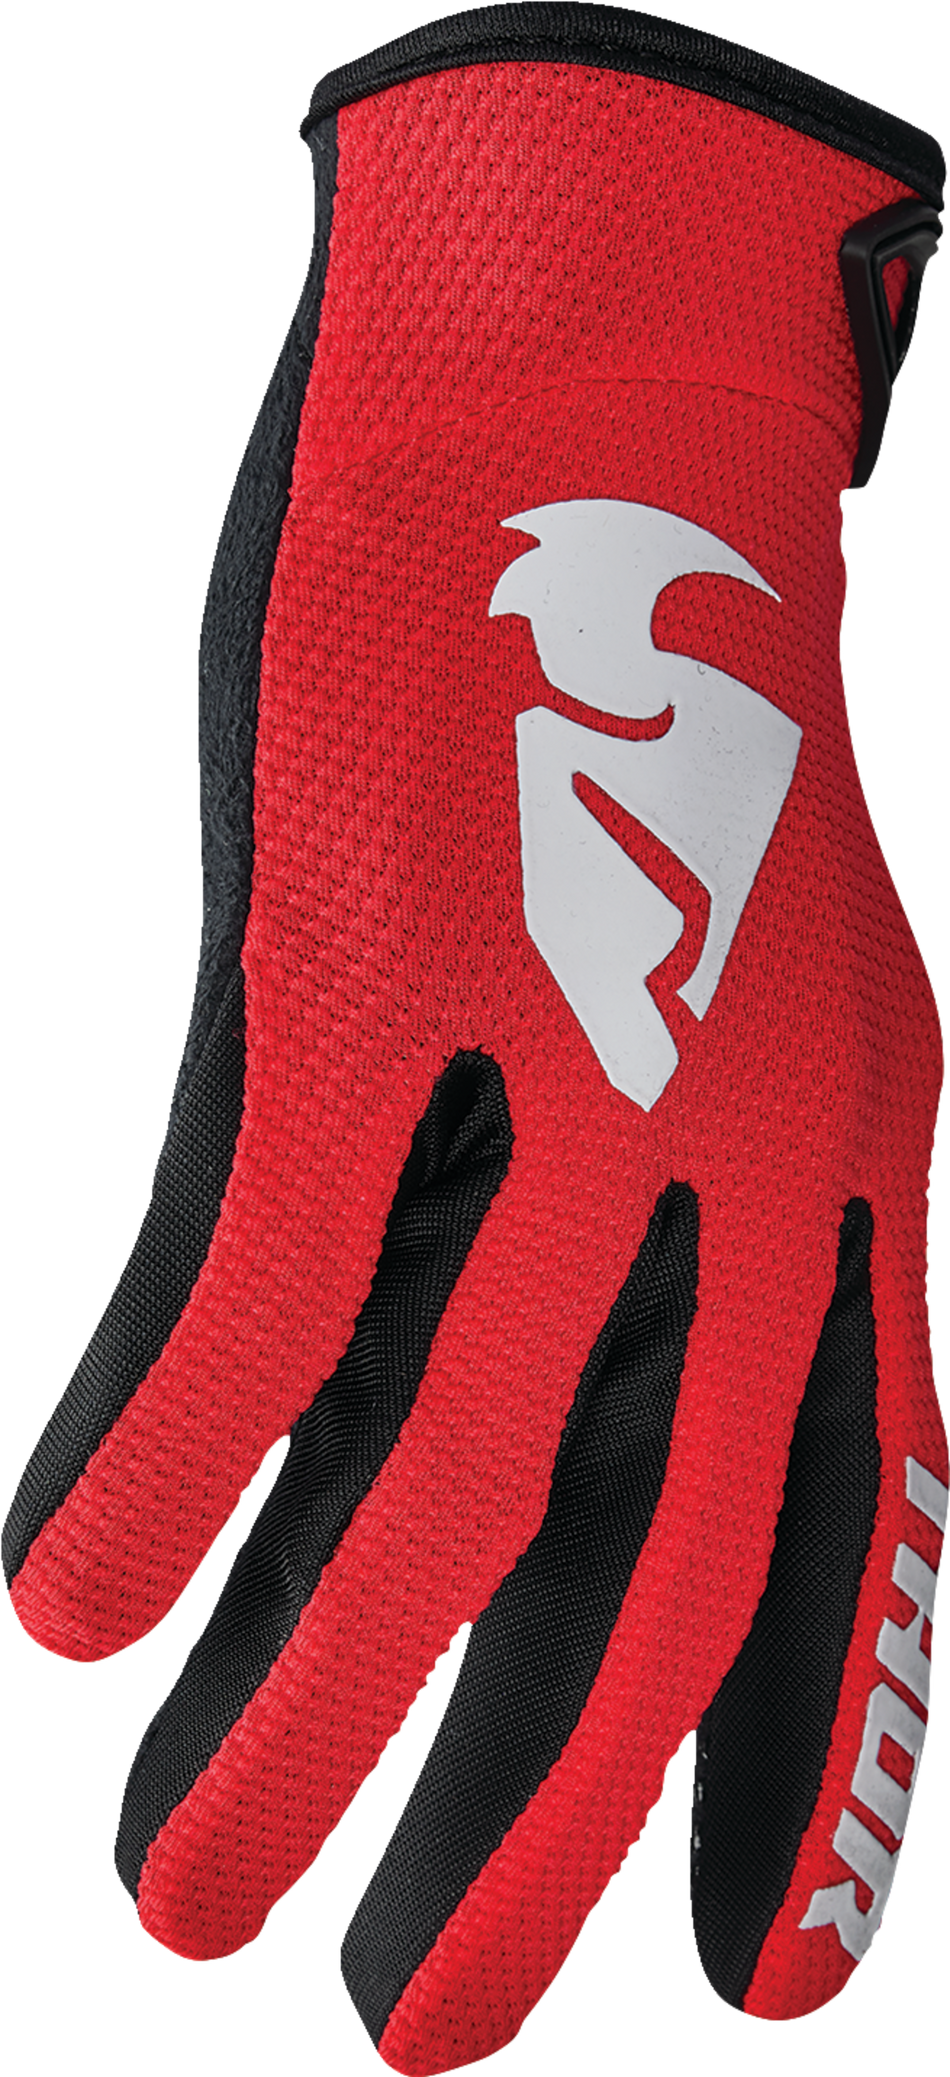 THOR Sector Gloves - Red/White - Small 3330-7268